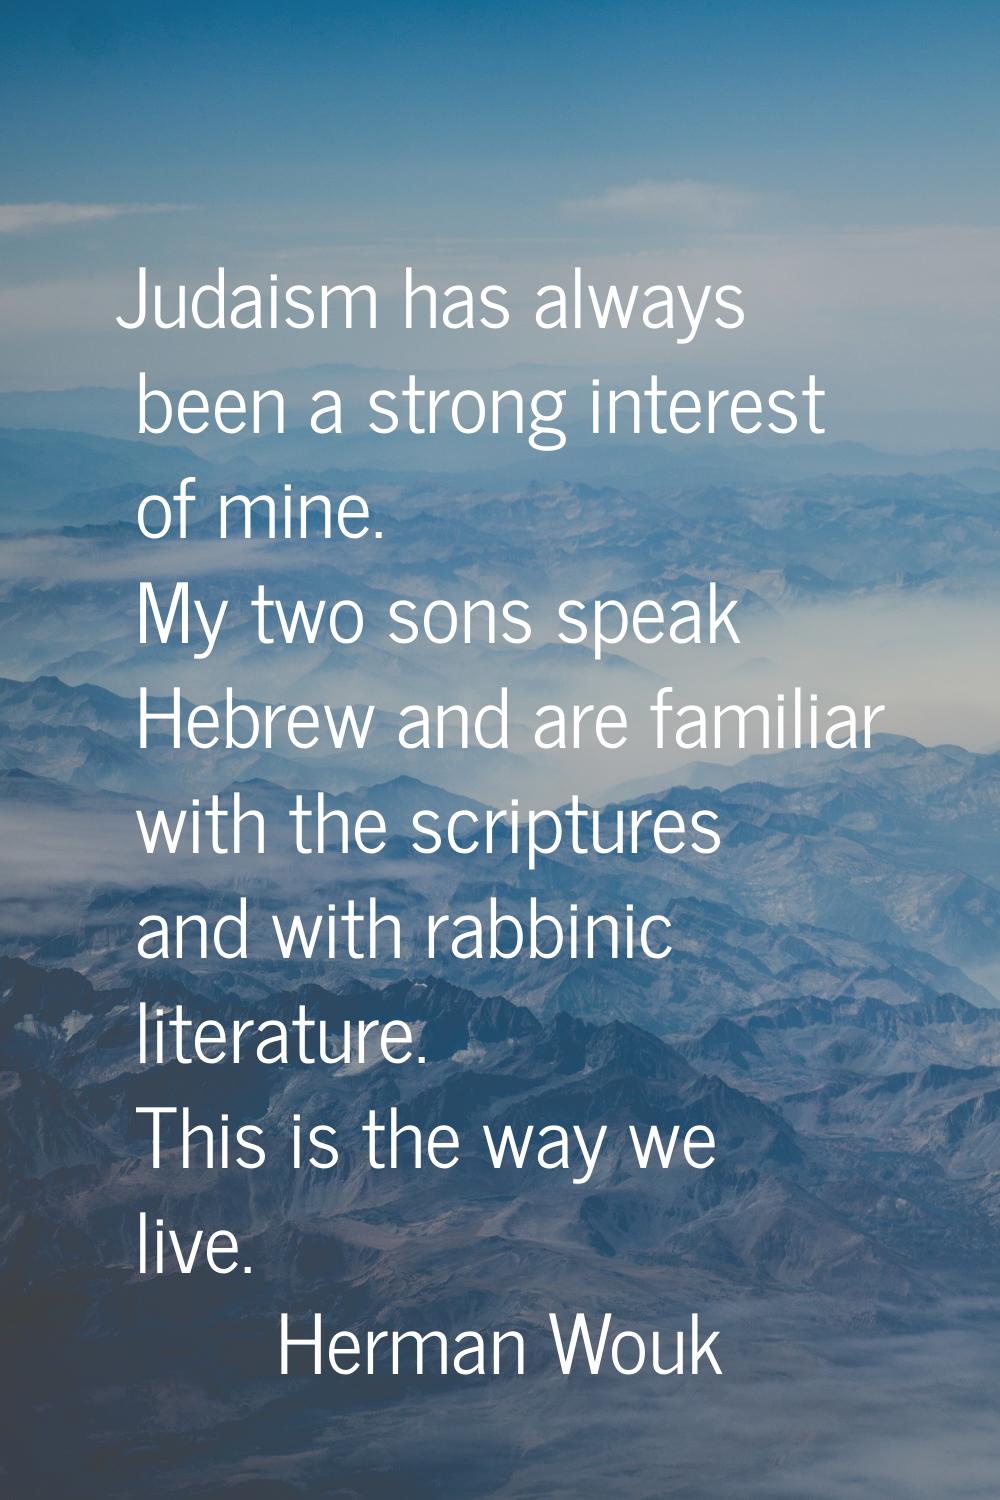 Judaism has always been a strong interest of mine. My two sons speak Hebrew and are familiar with t